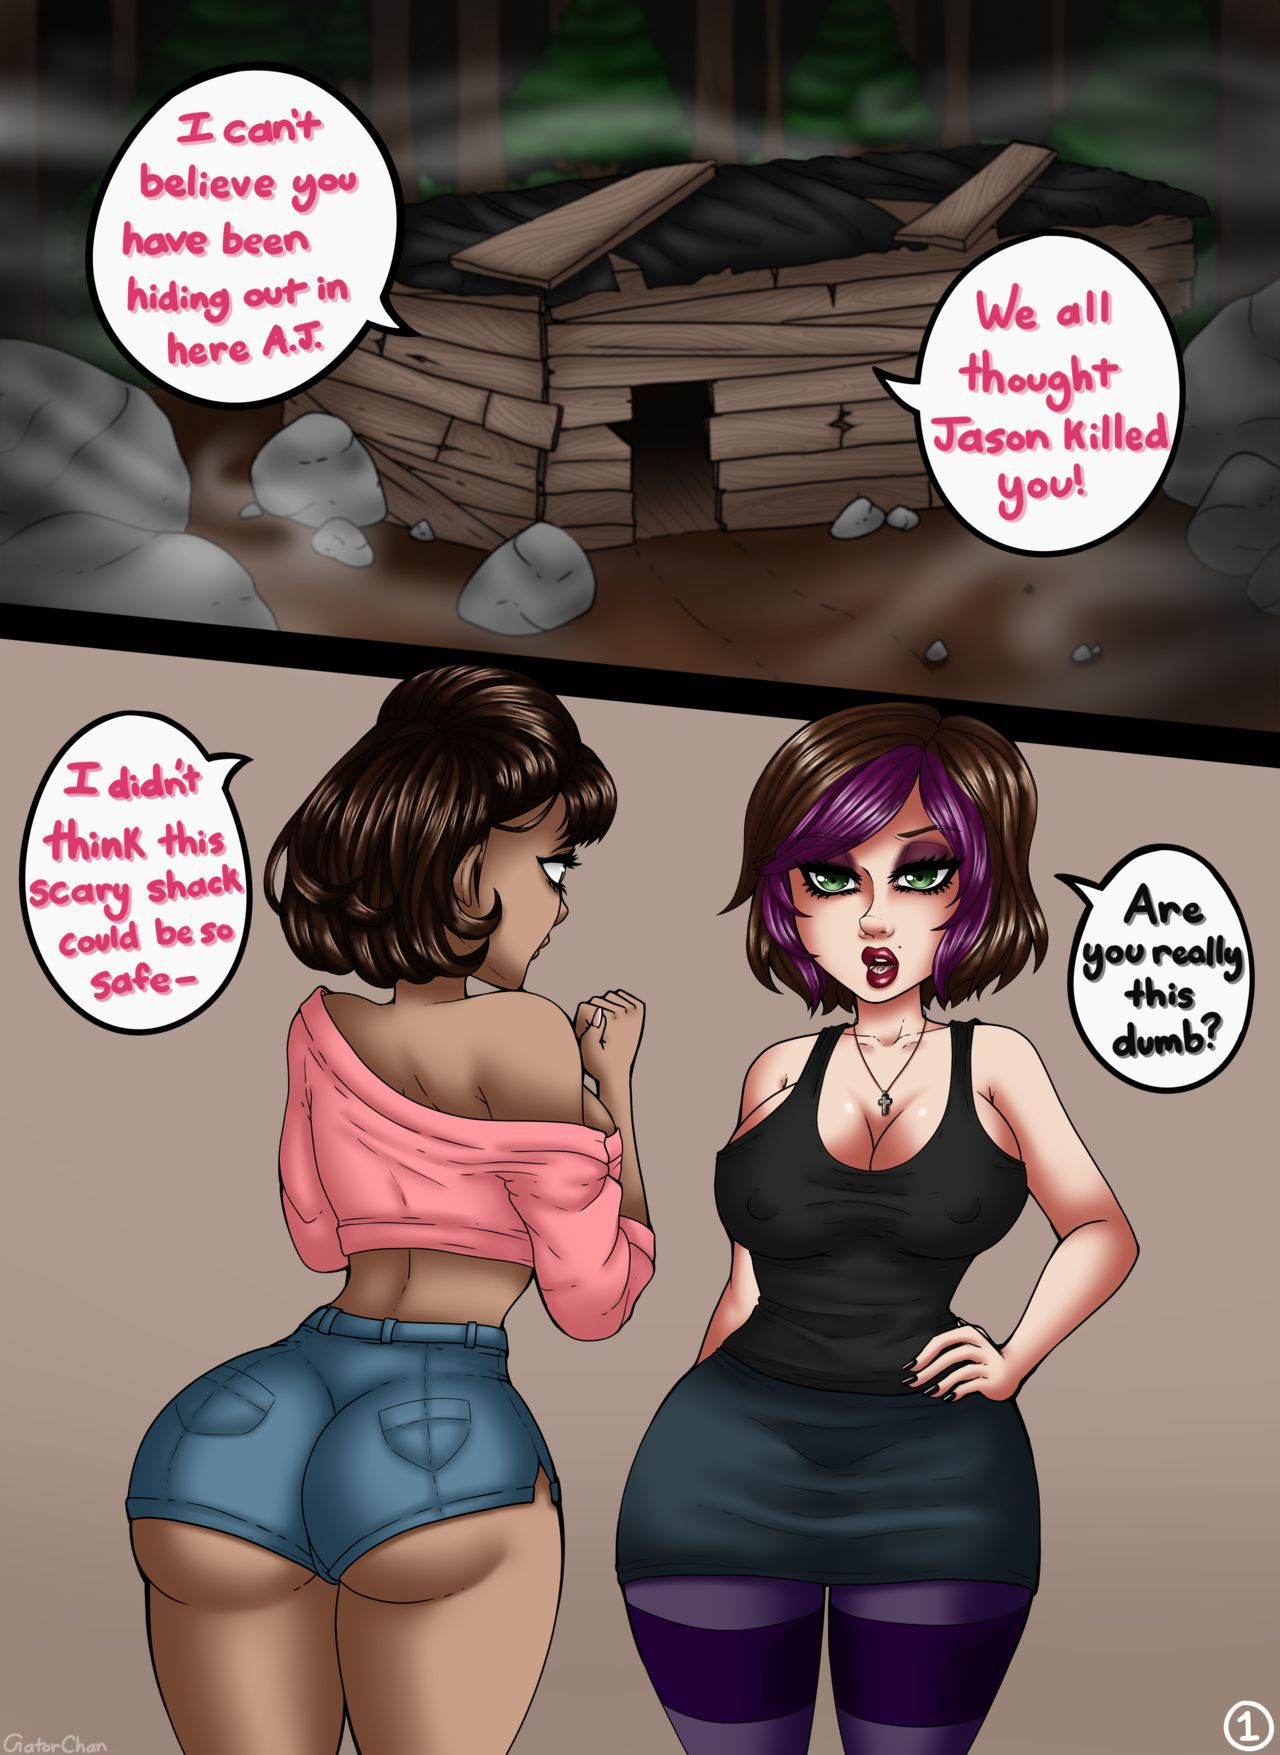 [GatorChan] Friday the 13th: Cabin Fever ch. 1-2 [Ongoing] 12